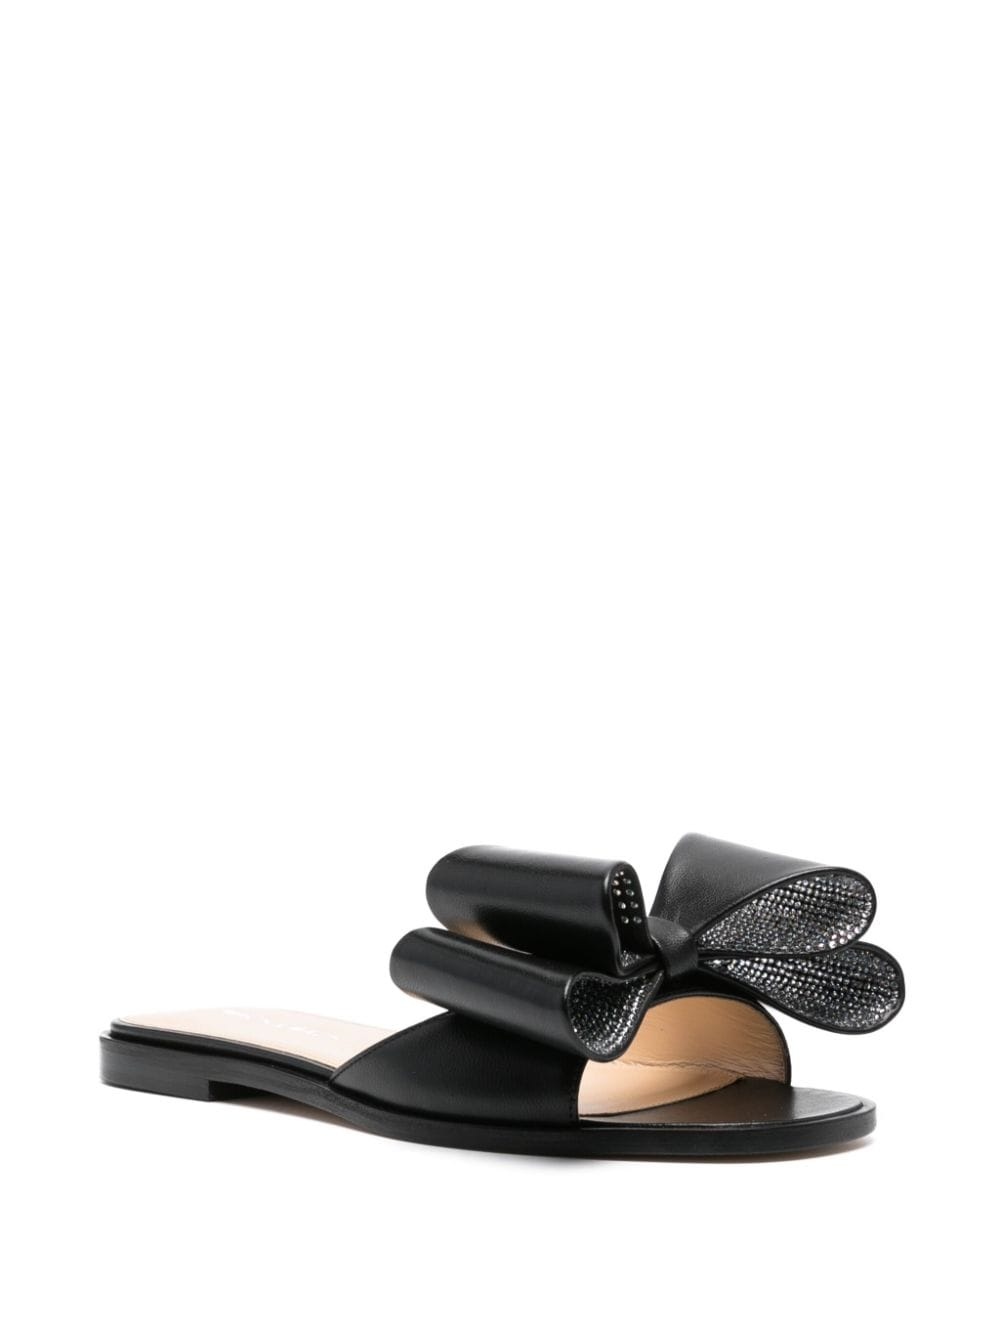 bow-detail leather sandals - 2